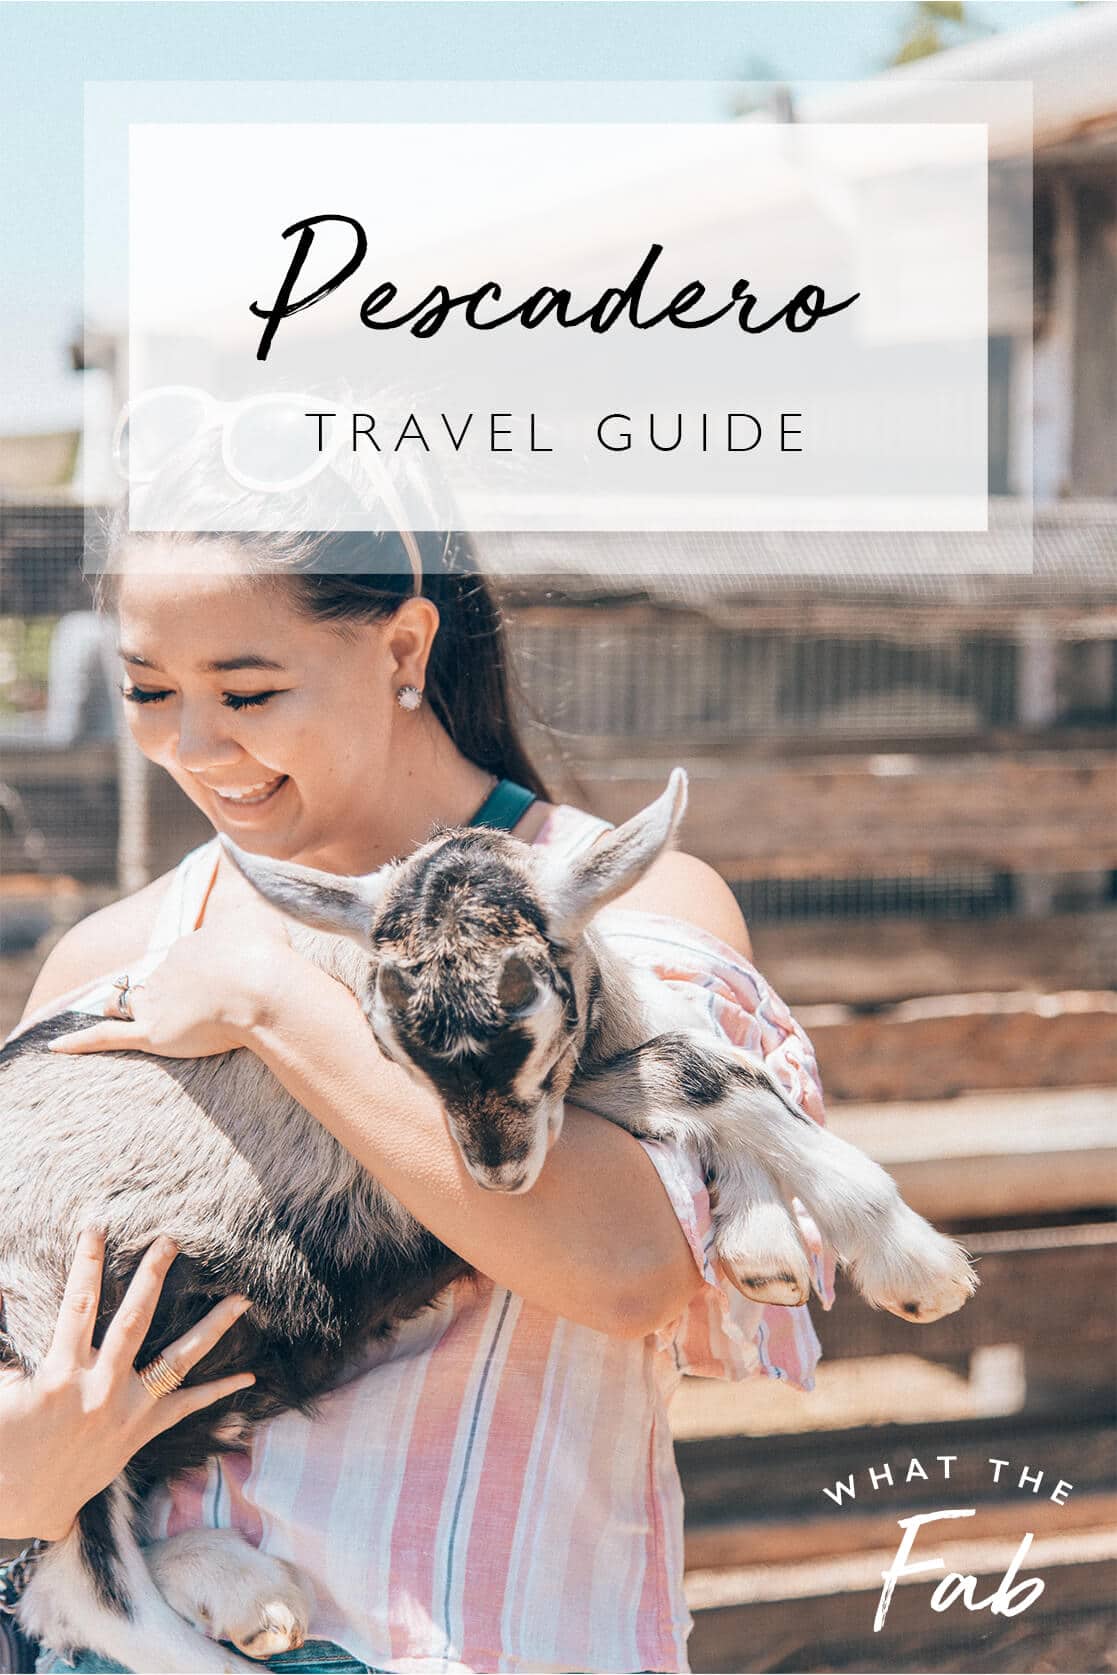 Things to do in Pescadero